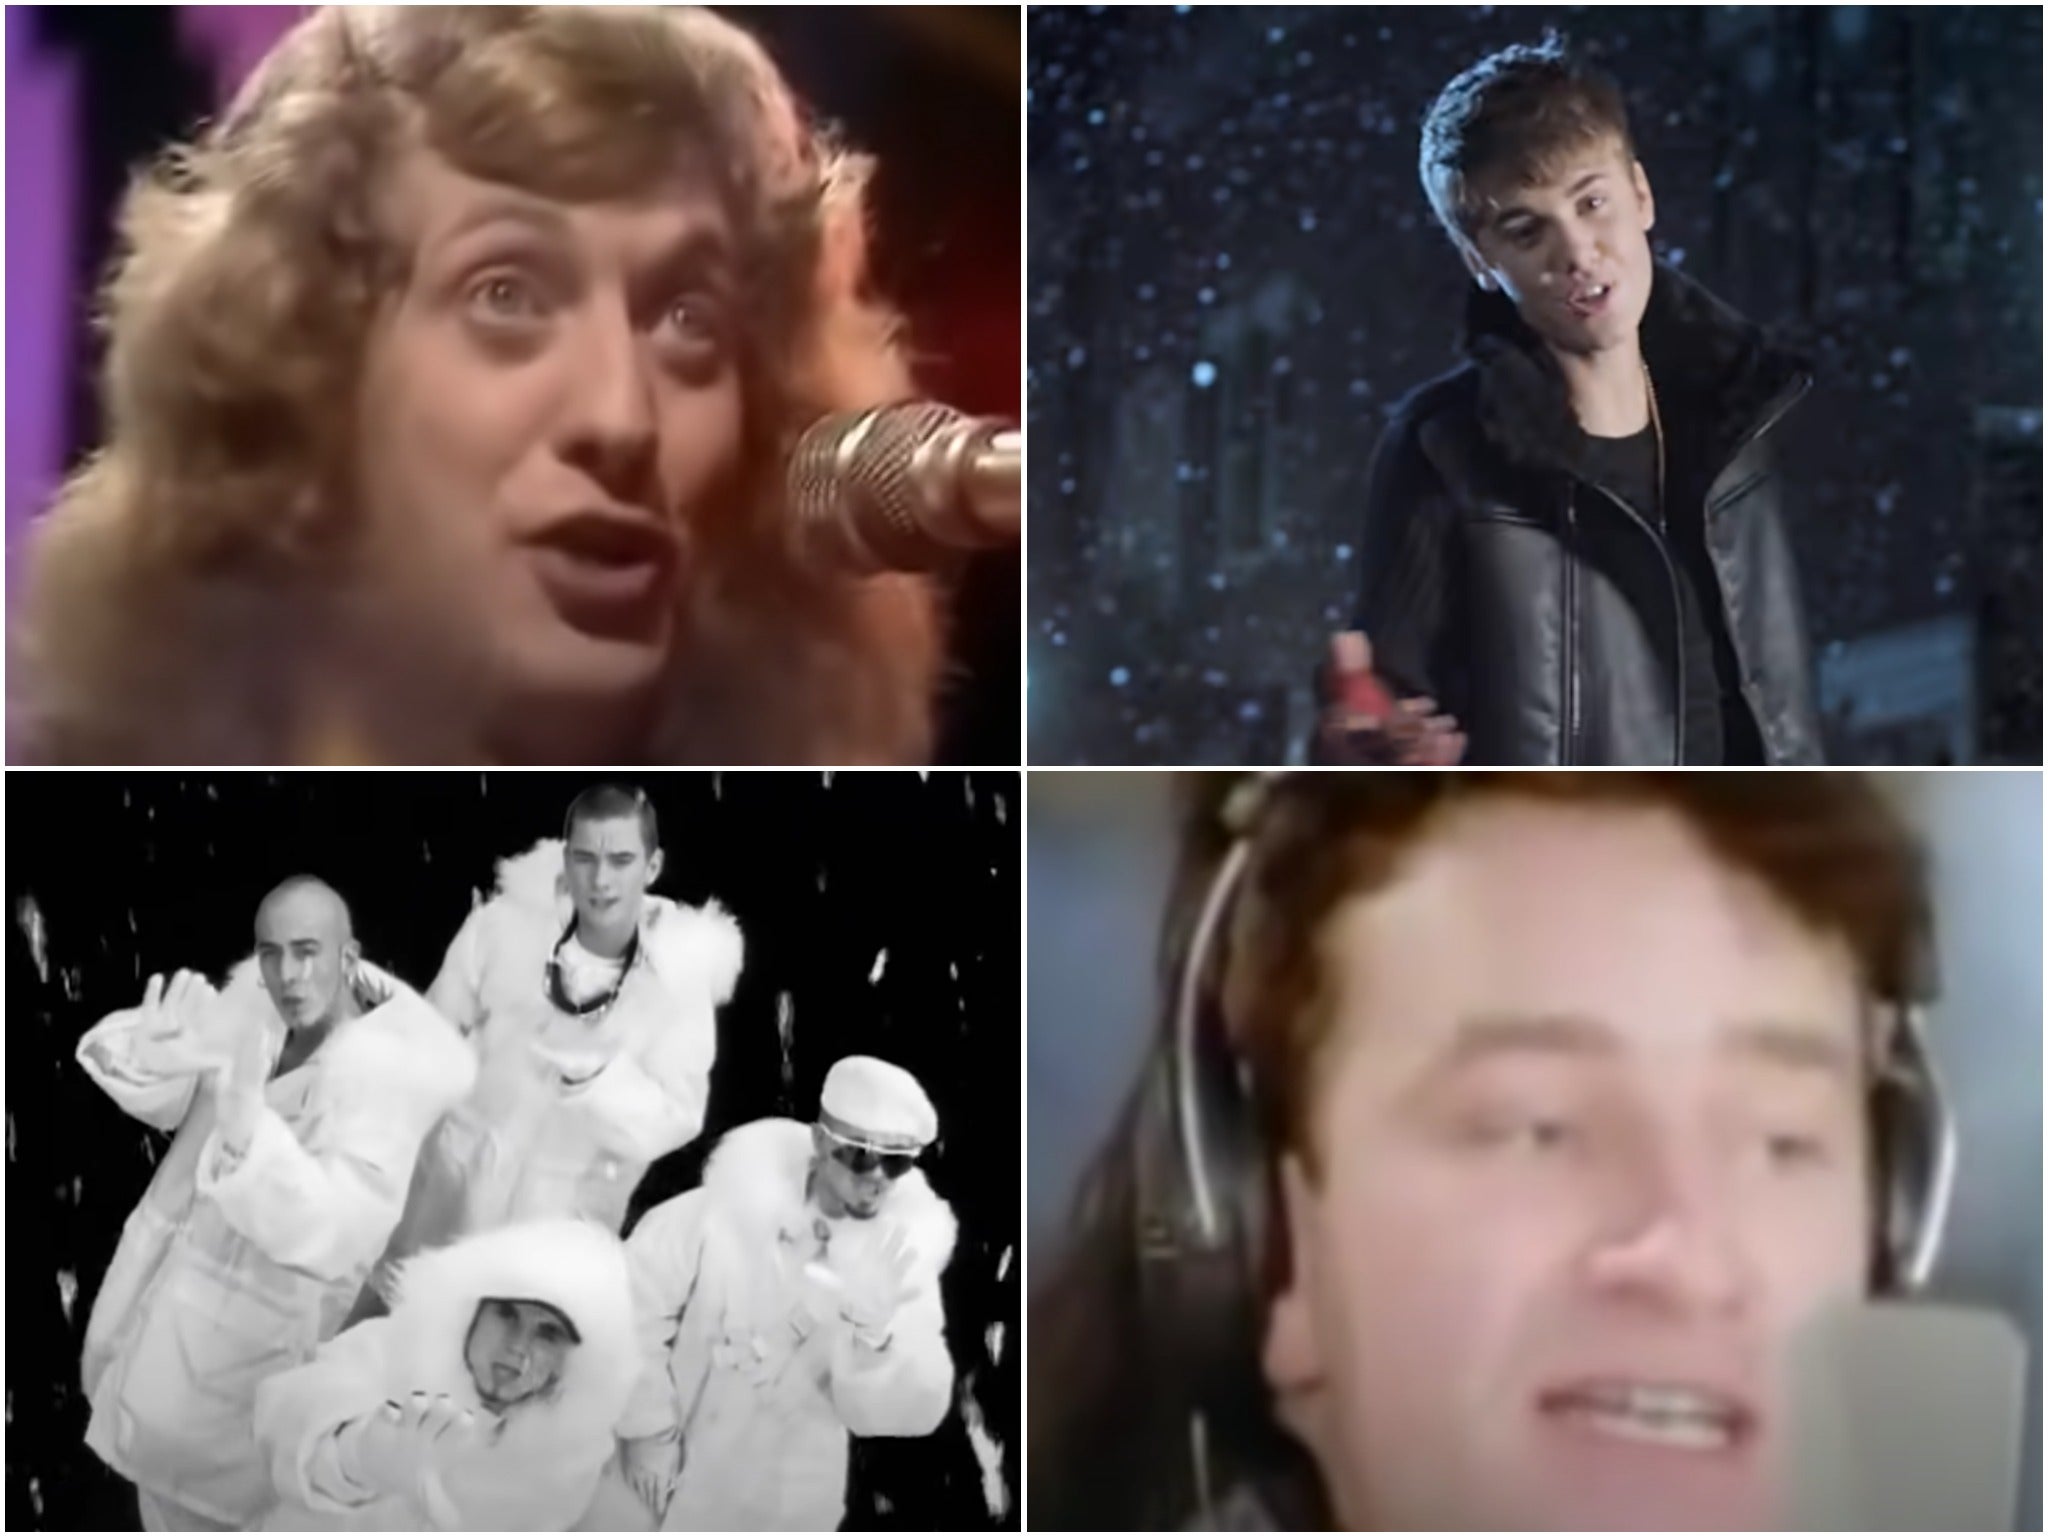 Clockwise from top left: ‘Merry Xmas Everybody’, ‘Mistletoe’, ‘Do They Know It’s Christmas’, ‘Stay Another Day’